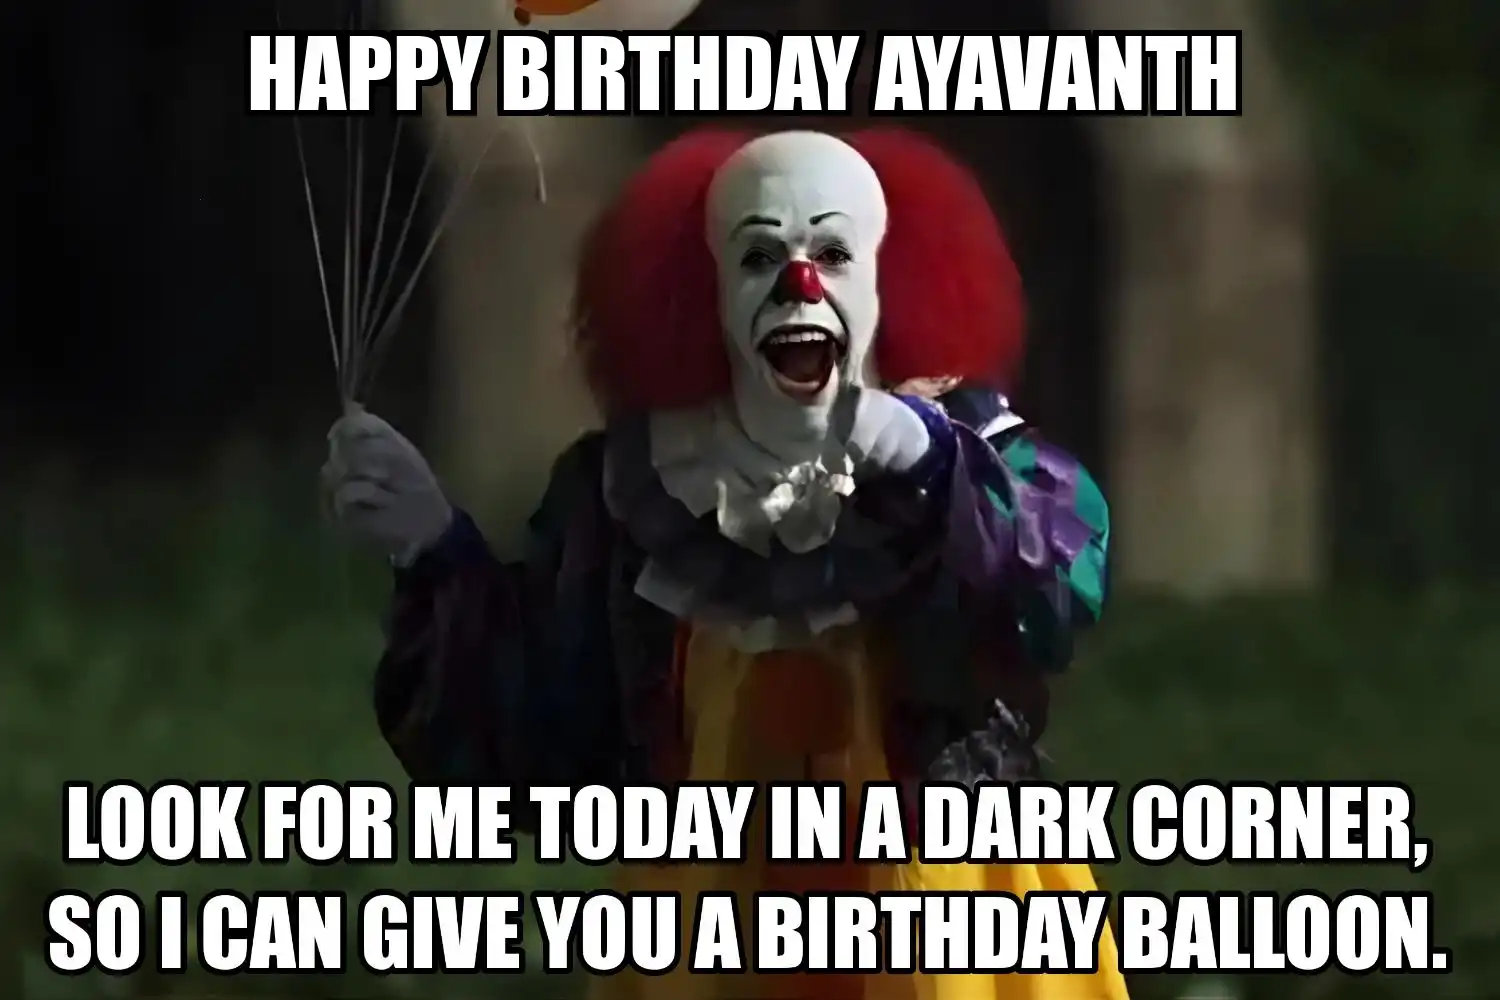 Happy Birthday Ayavanth I Can Give You A Balloon Meme